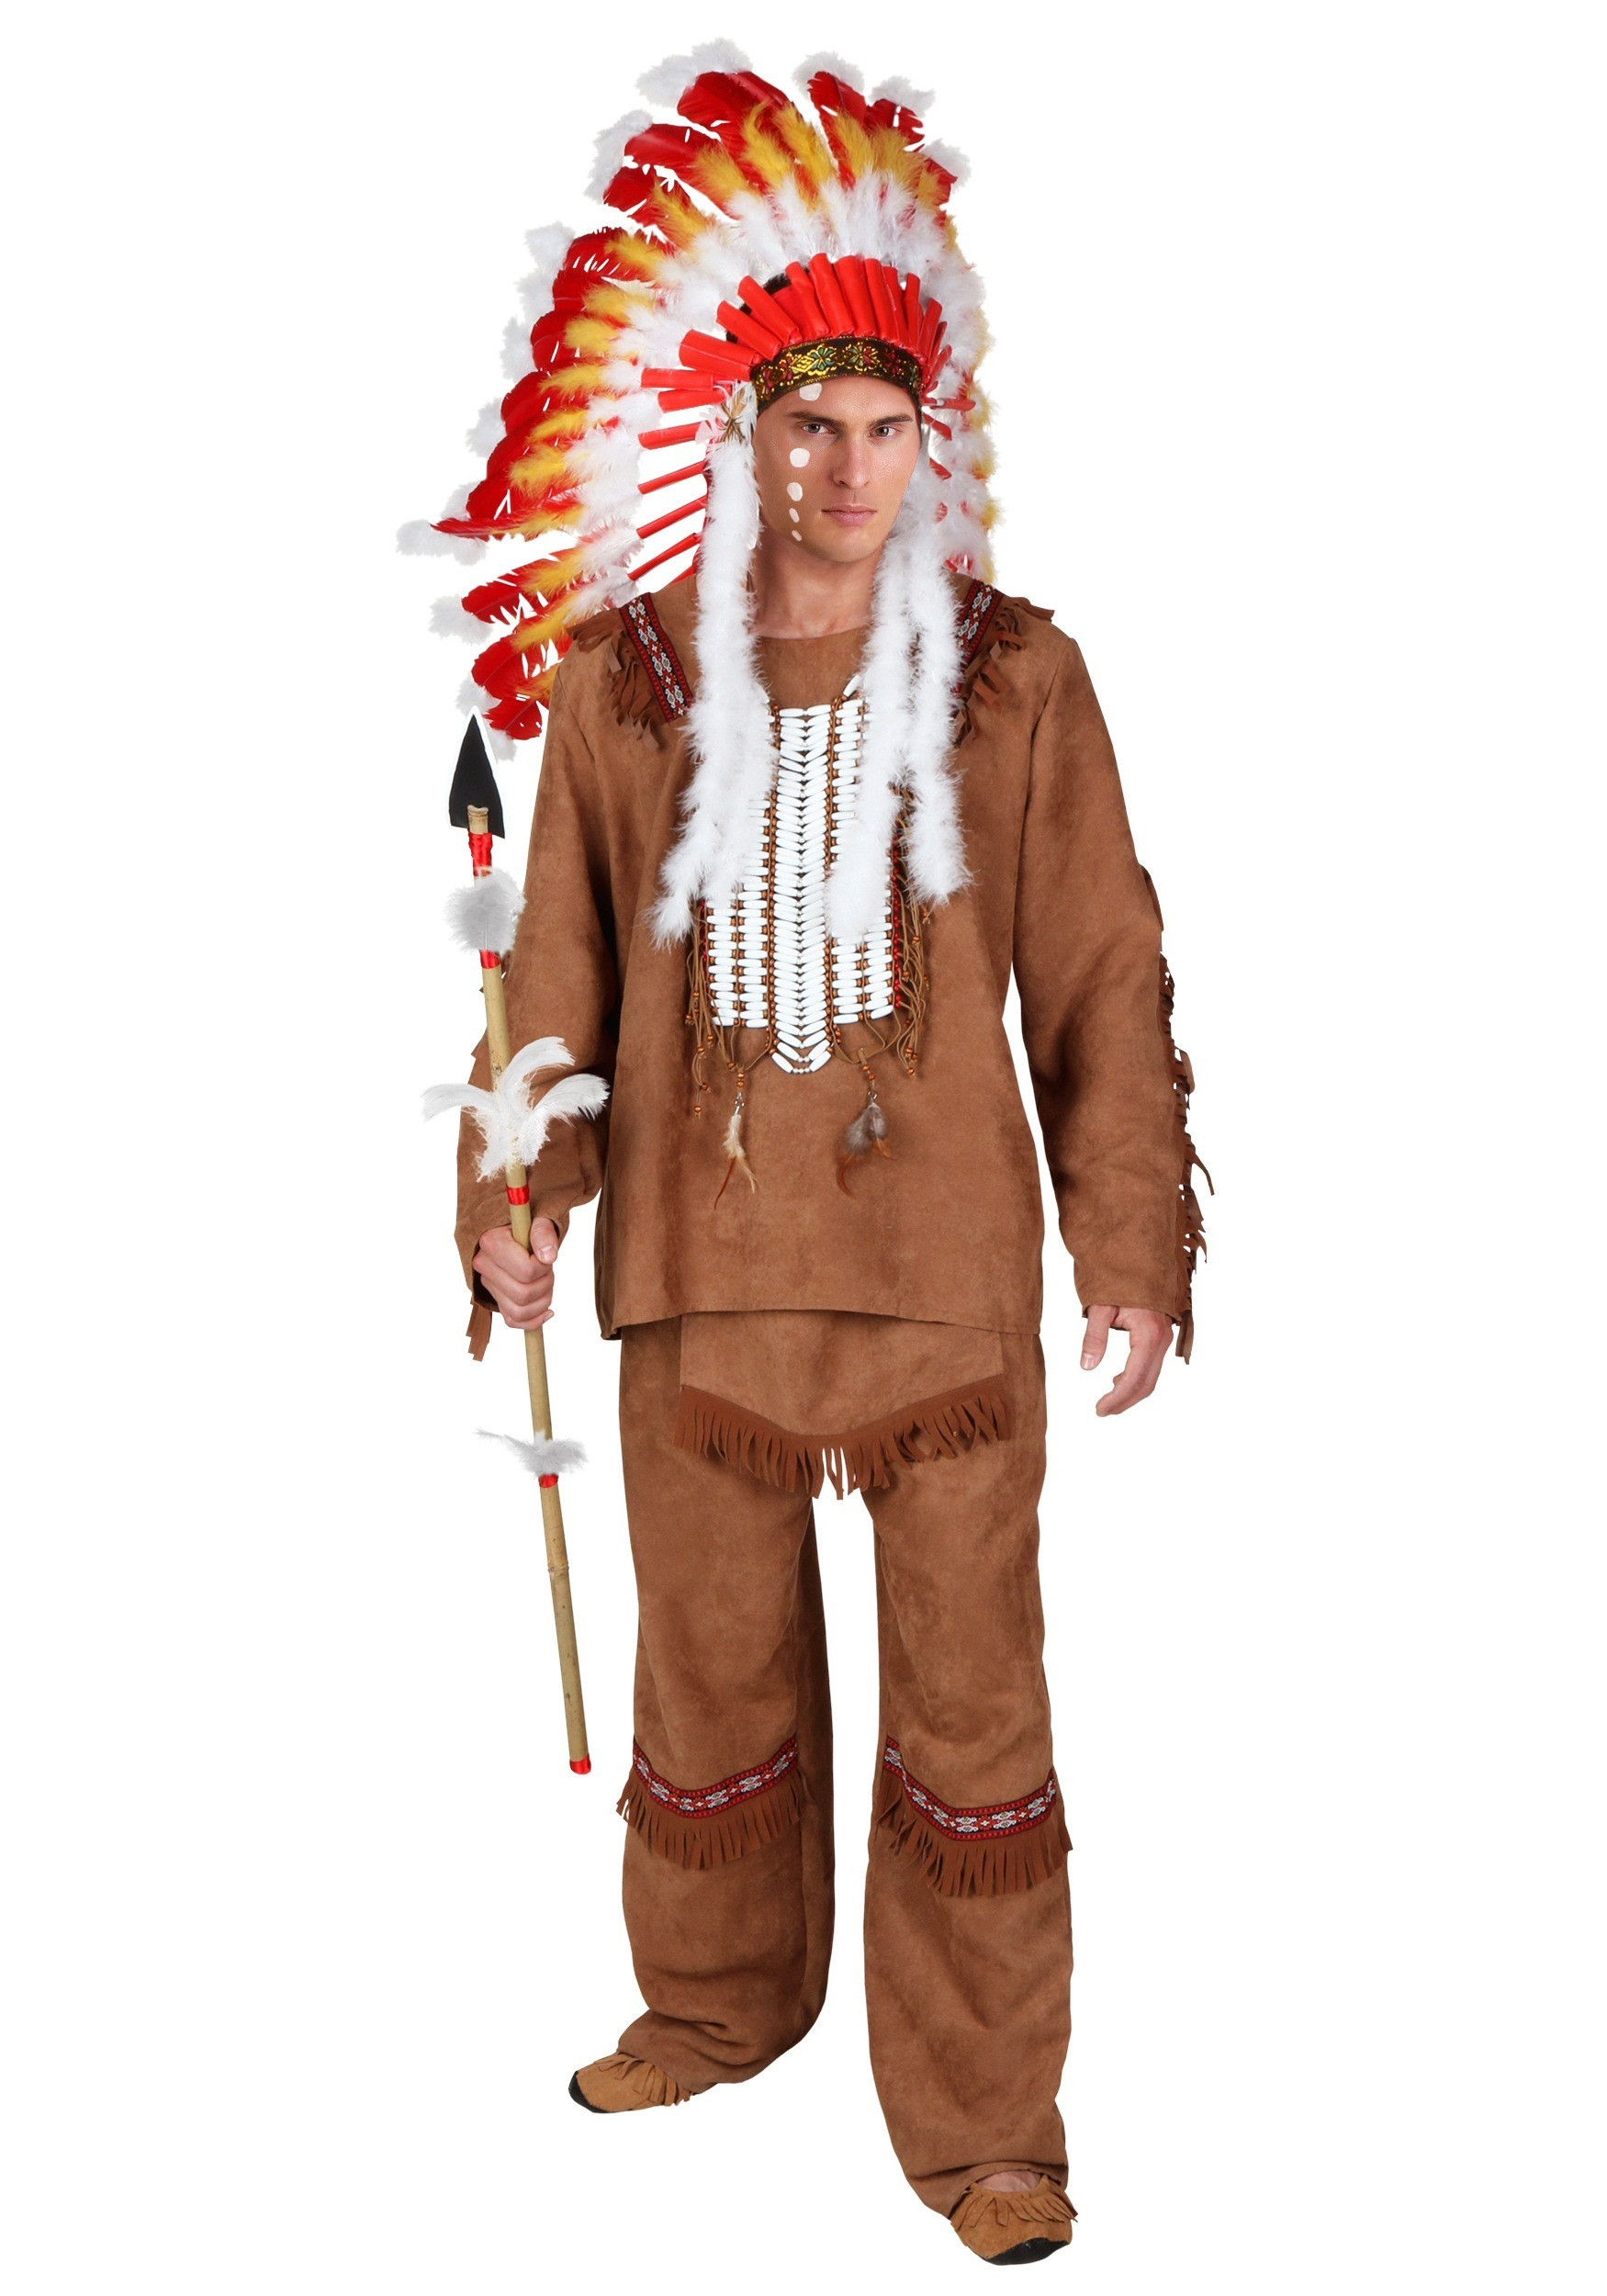 Halloween Party Costume Ideas For Guys
 halloween costume ideas college guys